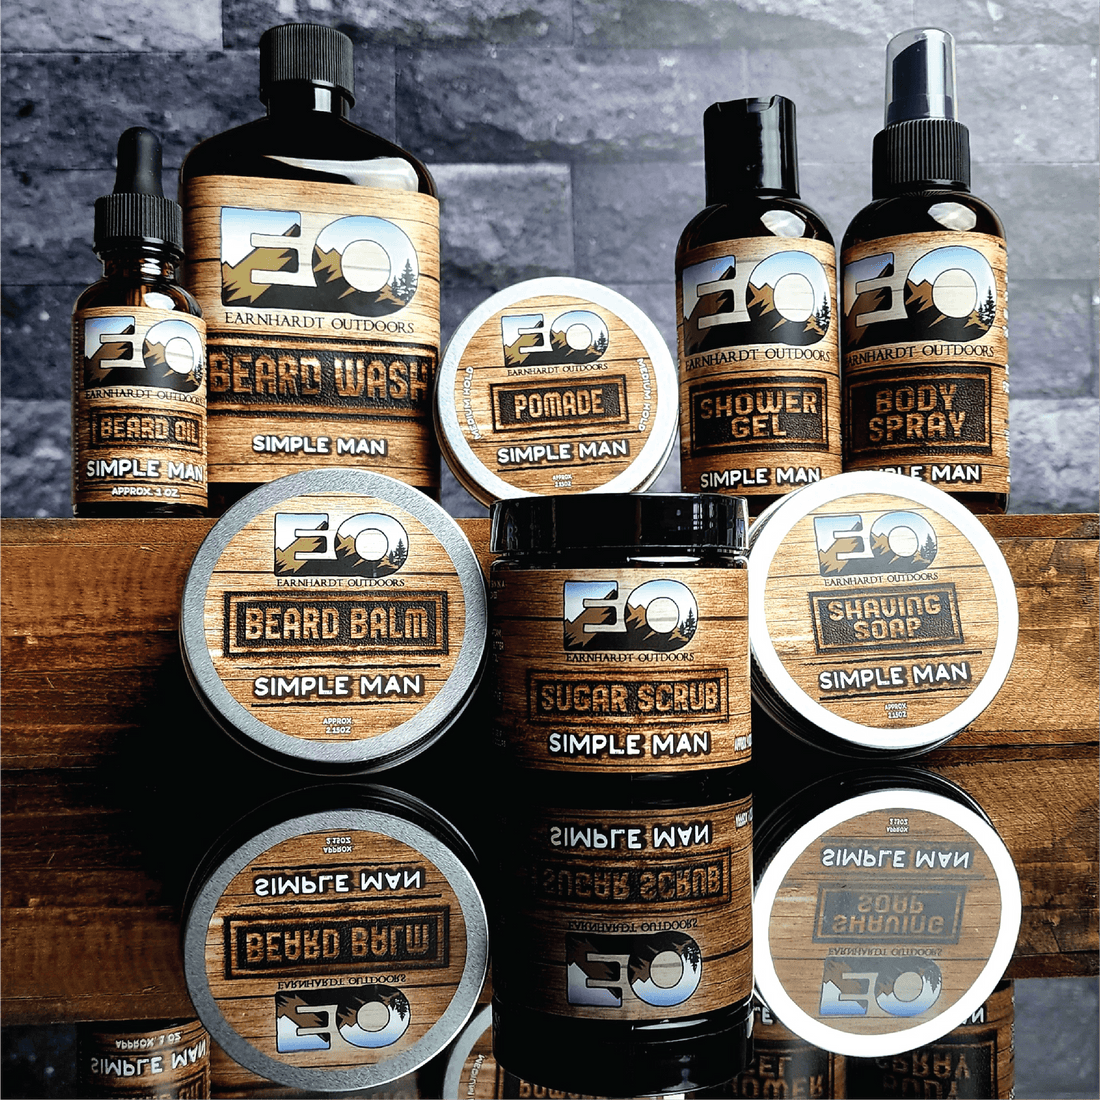 Simple Man Earnhardt Outdoors Pomade - Old Town Soap Co.